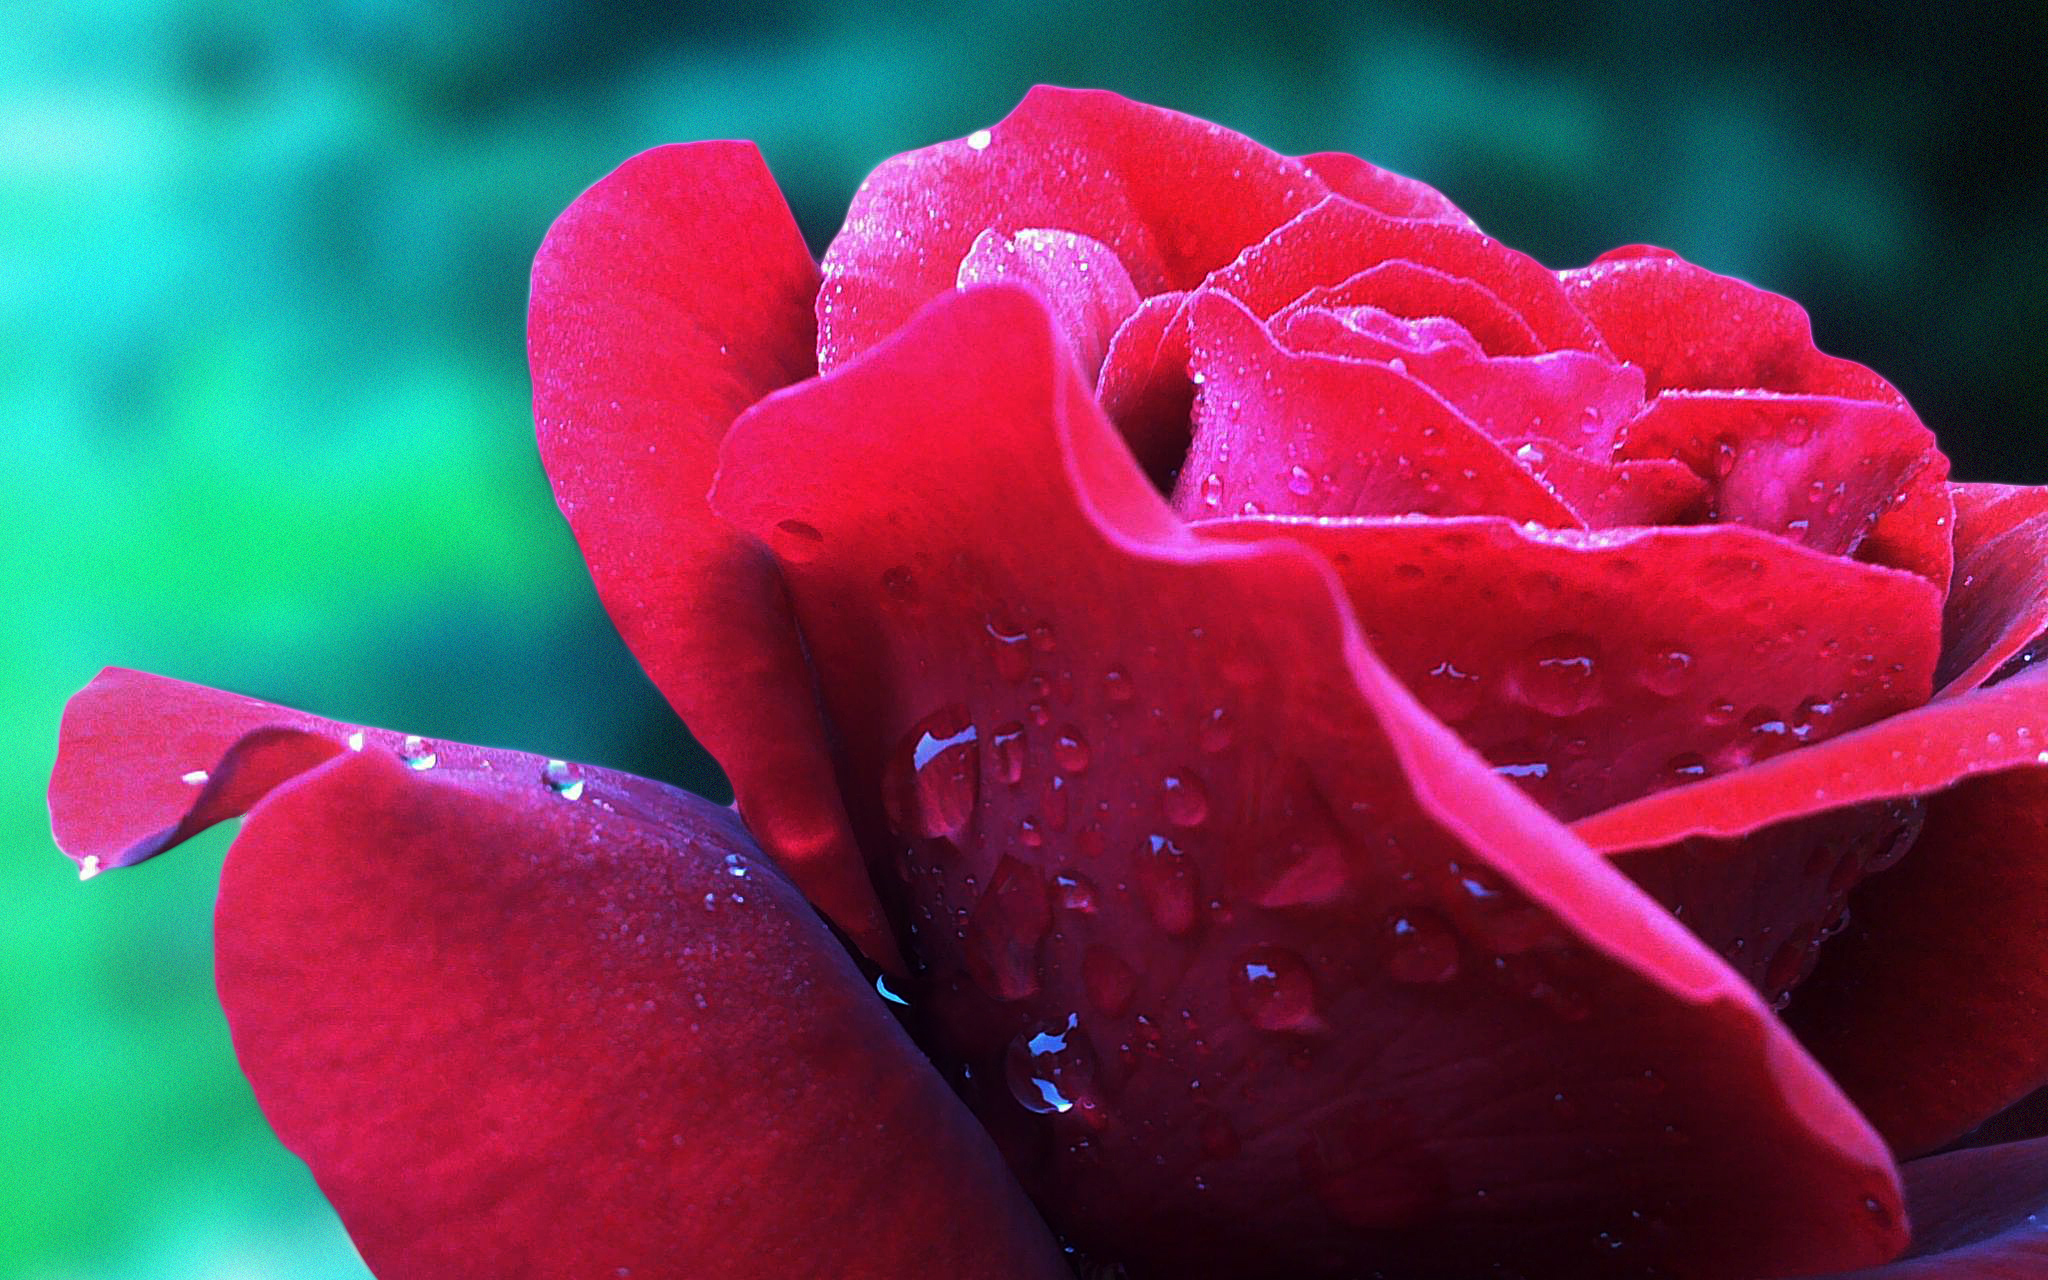 Red rose with water droplets.